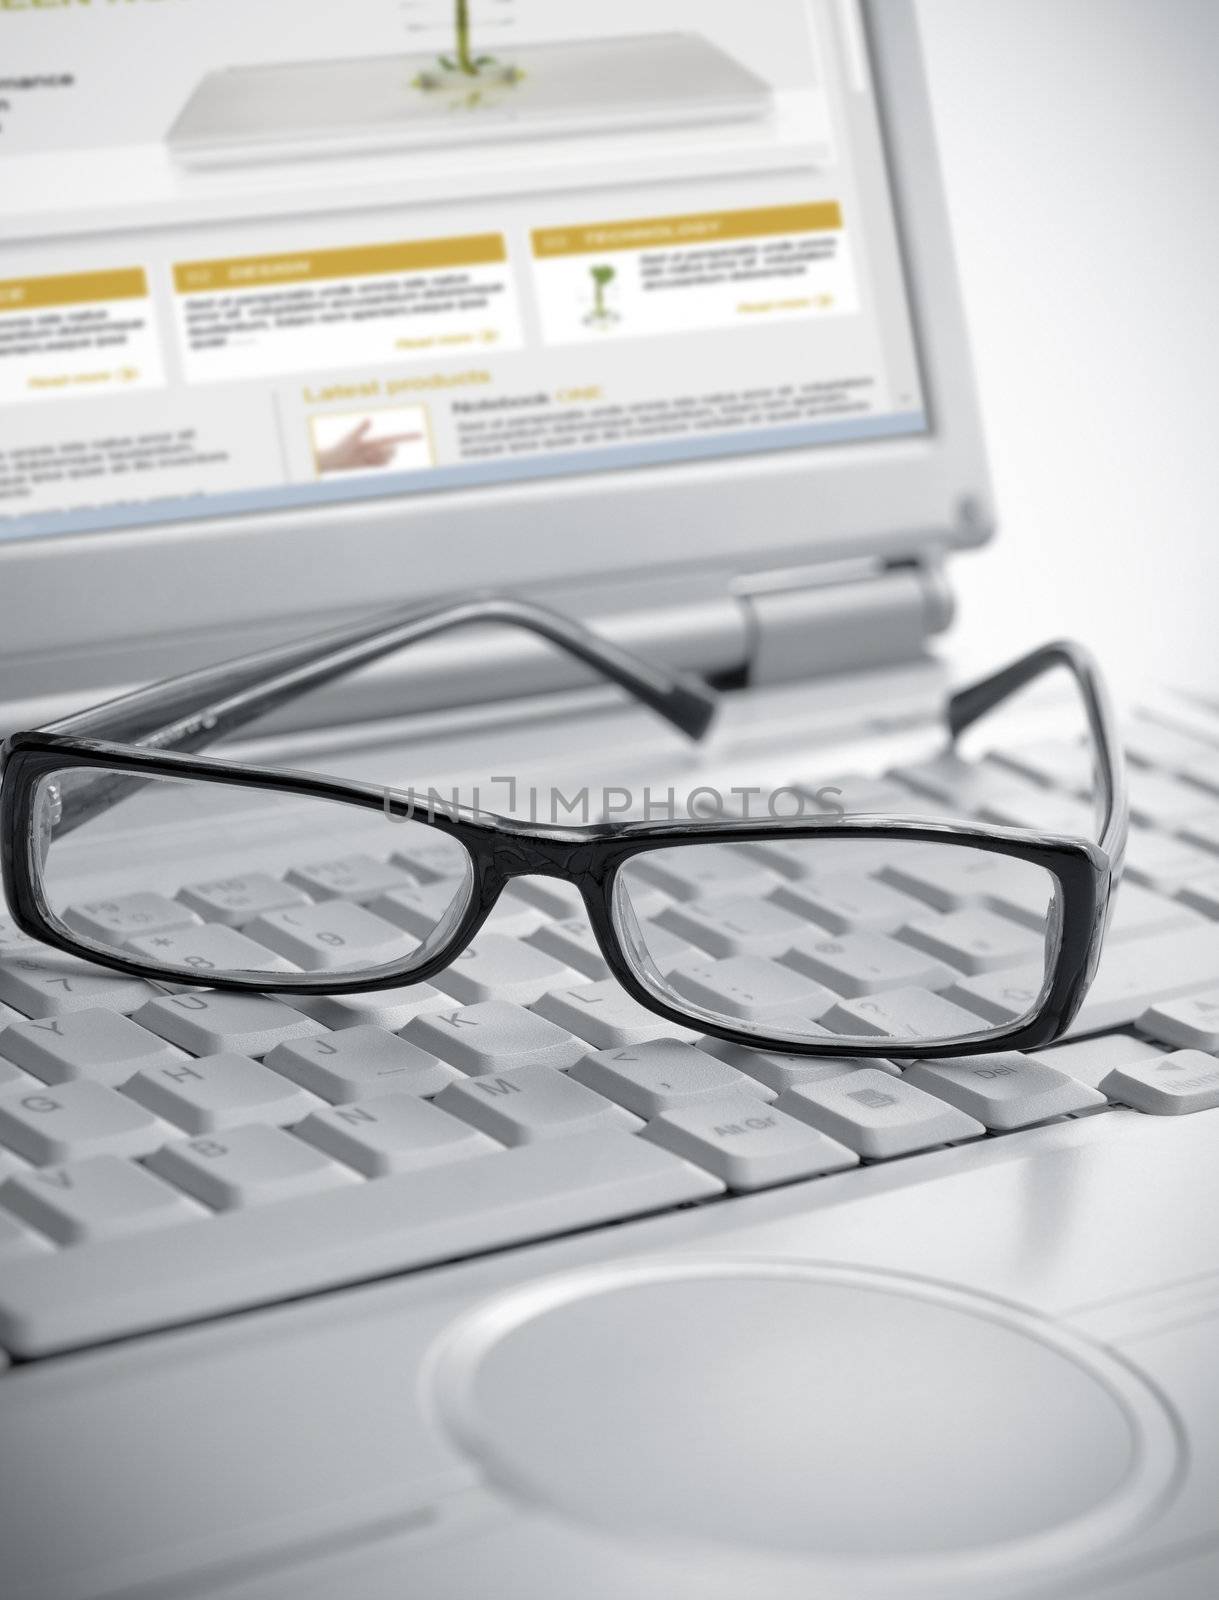 Pair of glasses sitting on laptop keyboard-Note:All elements from this collage are created by me